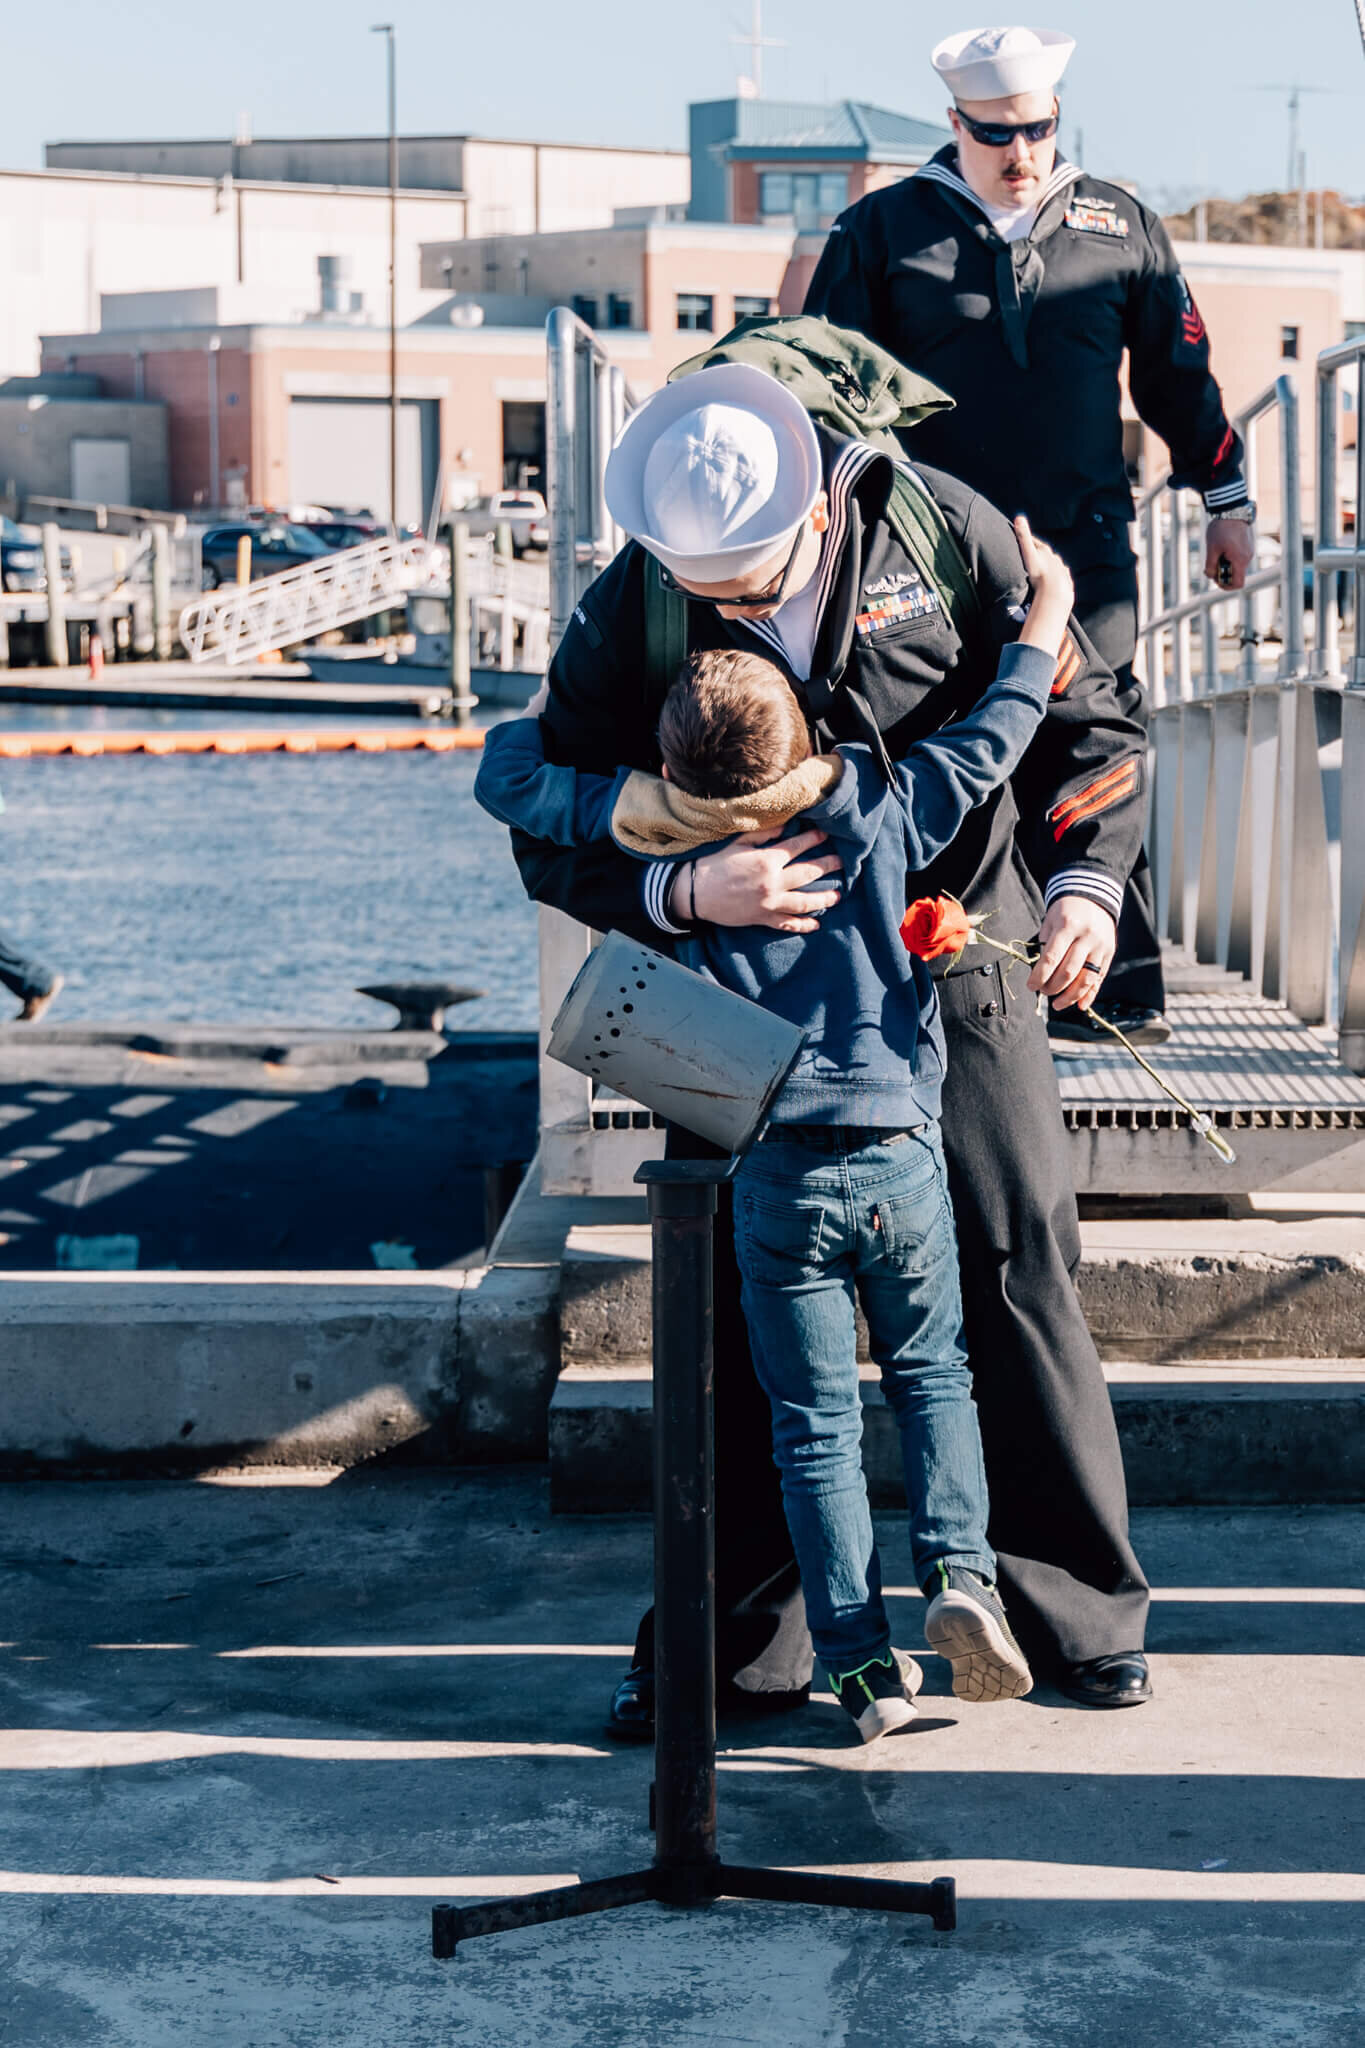 Naval petty officer hugs child while stepping off brow of USS North Dakota after 7 month deployment.